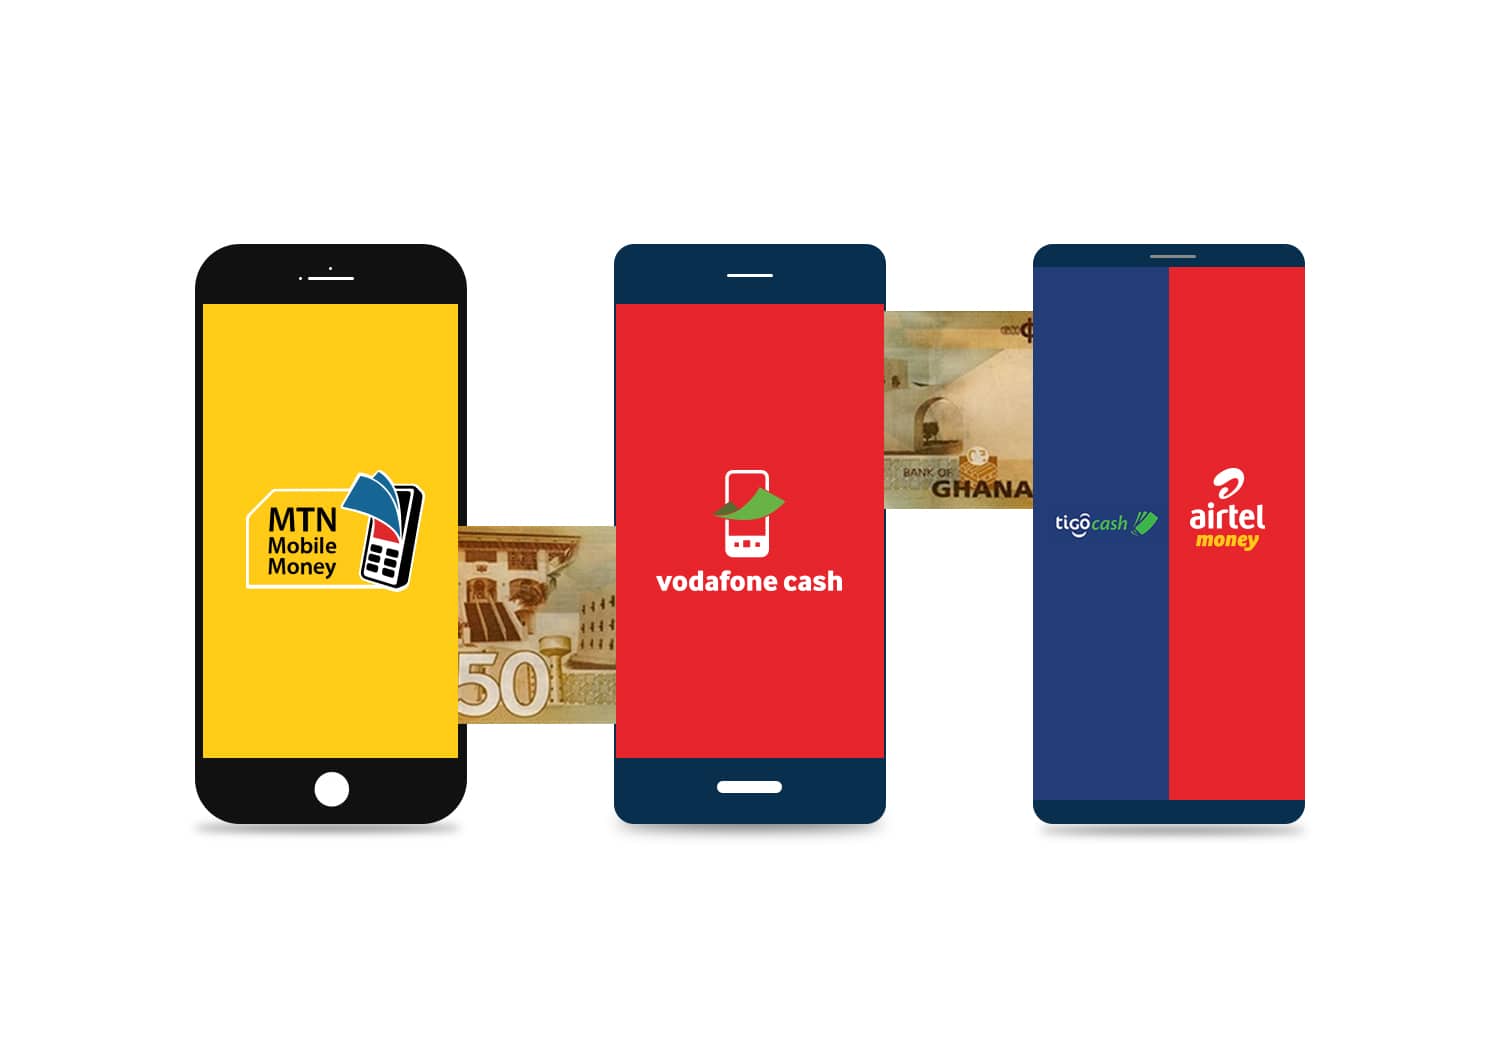 How To Transfer Credit From Mtn Mobile Money To Vodafone